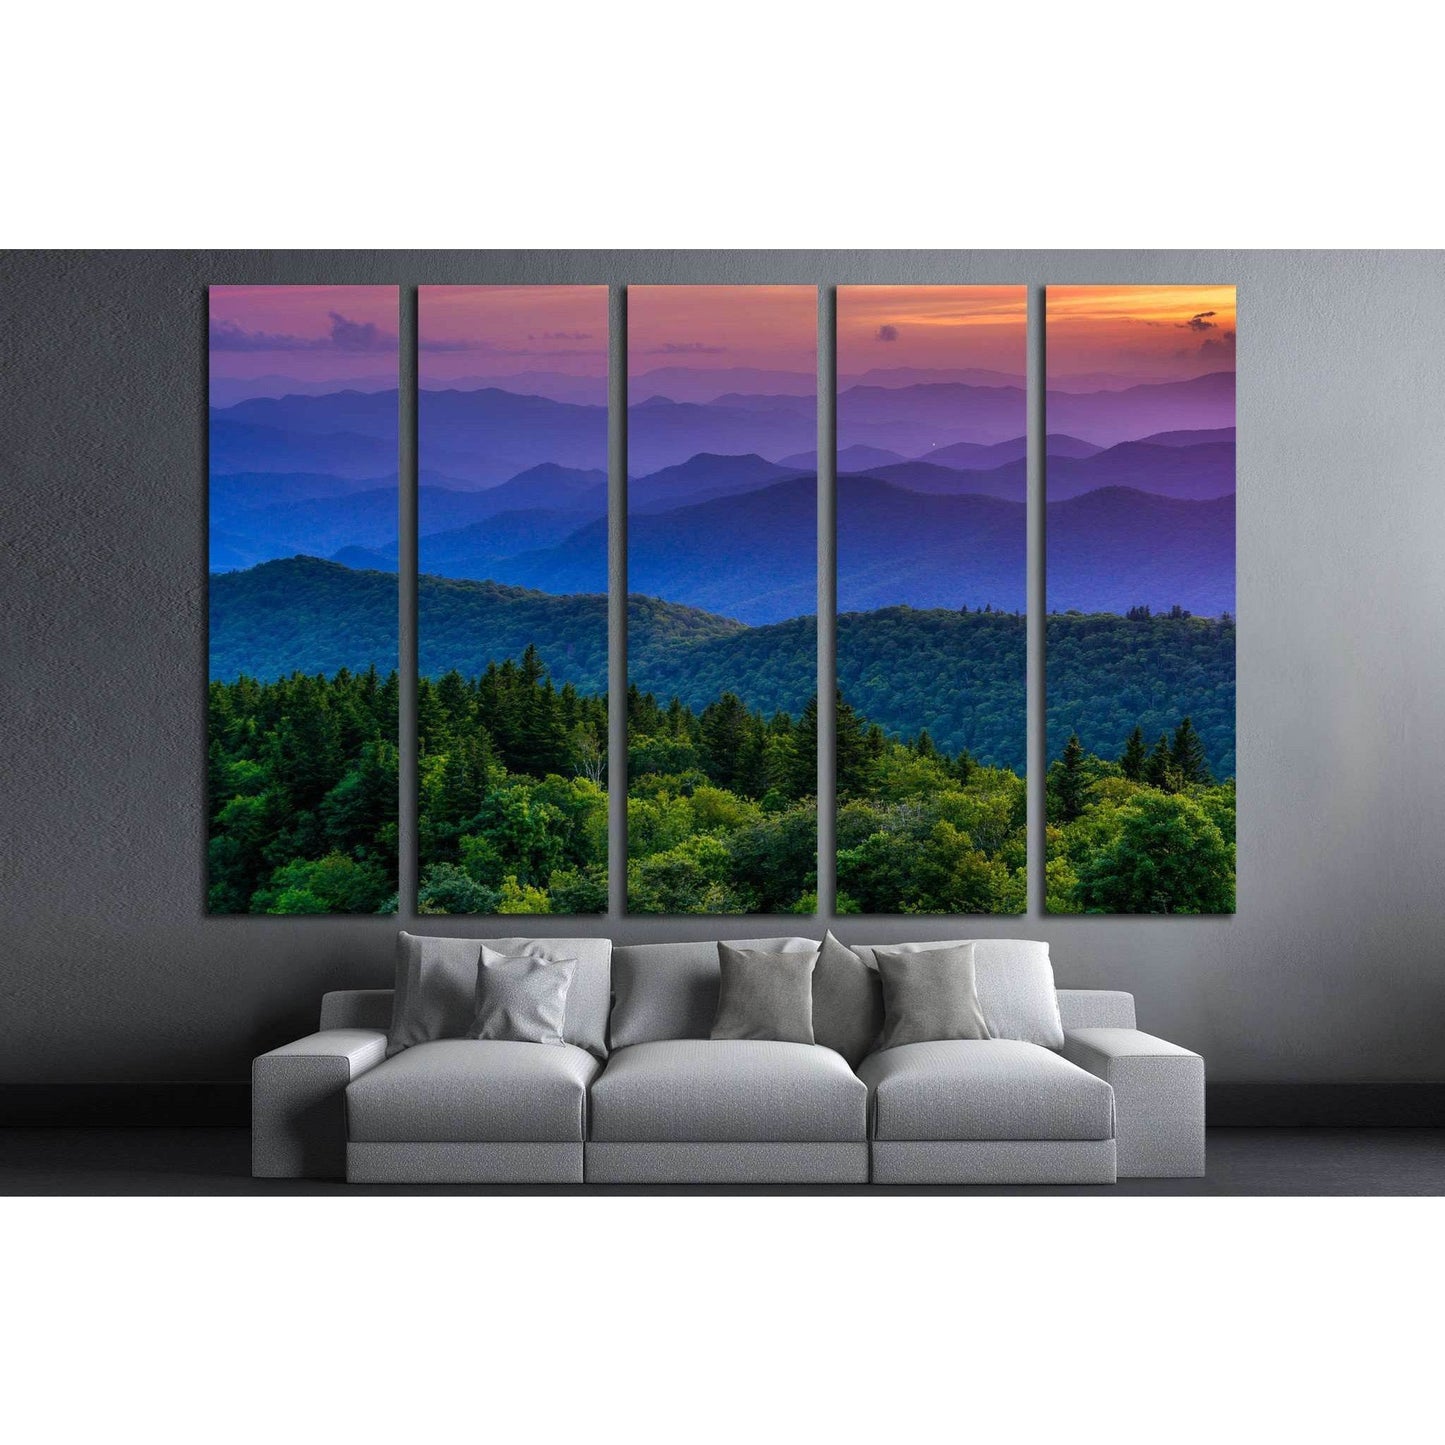 Sunset from Cowee Mountains Overlook, on the Blue Ridge Parkway in North Carolina №1970 Ready to Hang Canvas PrintThis canvas print elegantly captures a sunset over a rolling mountain landscape, presenting a harmonious blend of purple skies and verdant gr